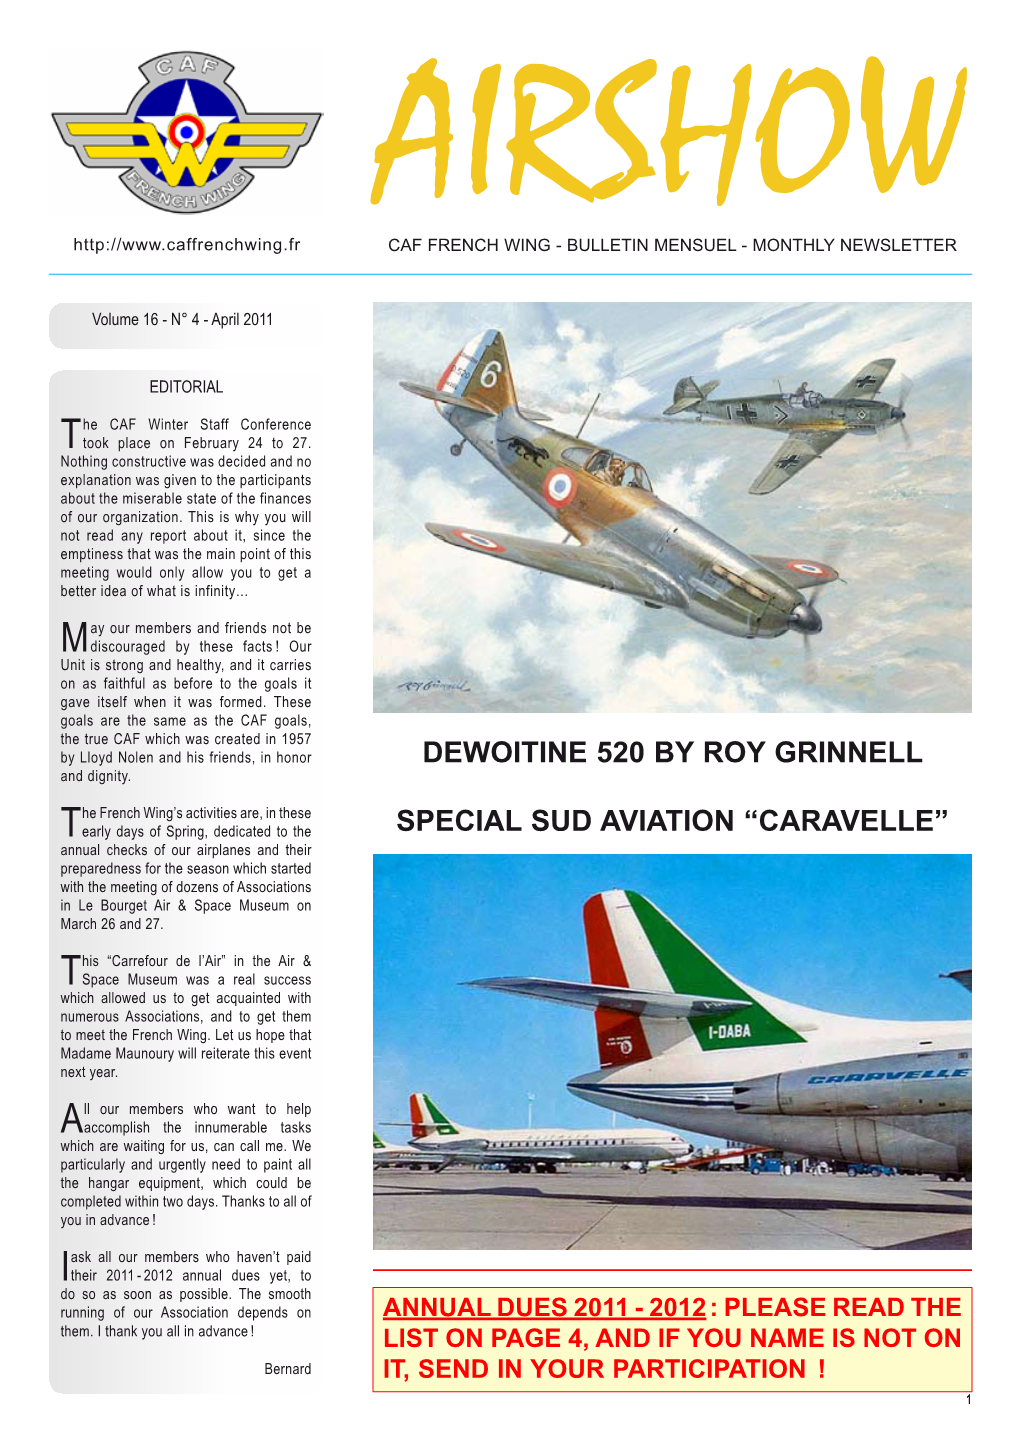 Dewoitine 520 by Roy Grinnell Special Sud Aviation “Caravelle”